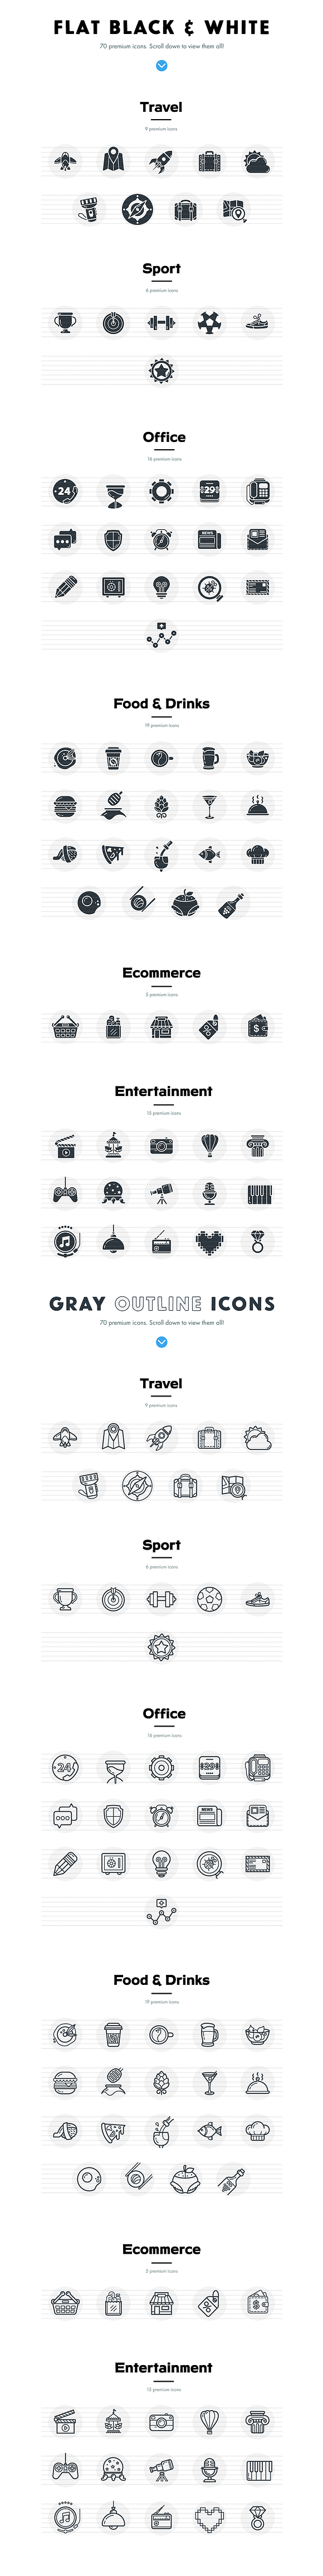 700 Premium Flat icons in Flat Icons - product preview 3